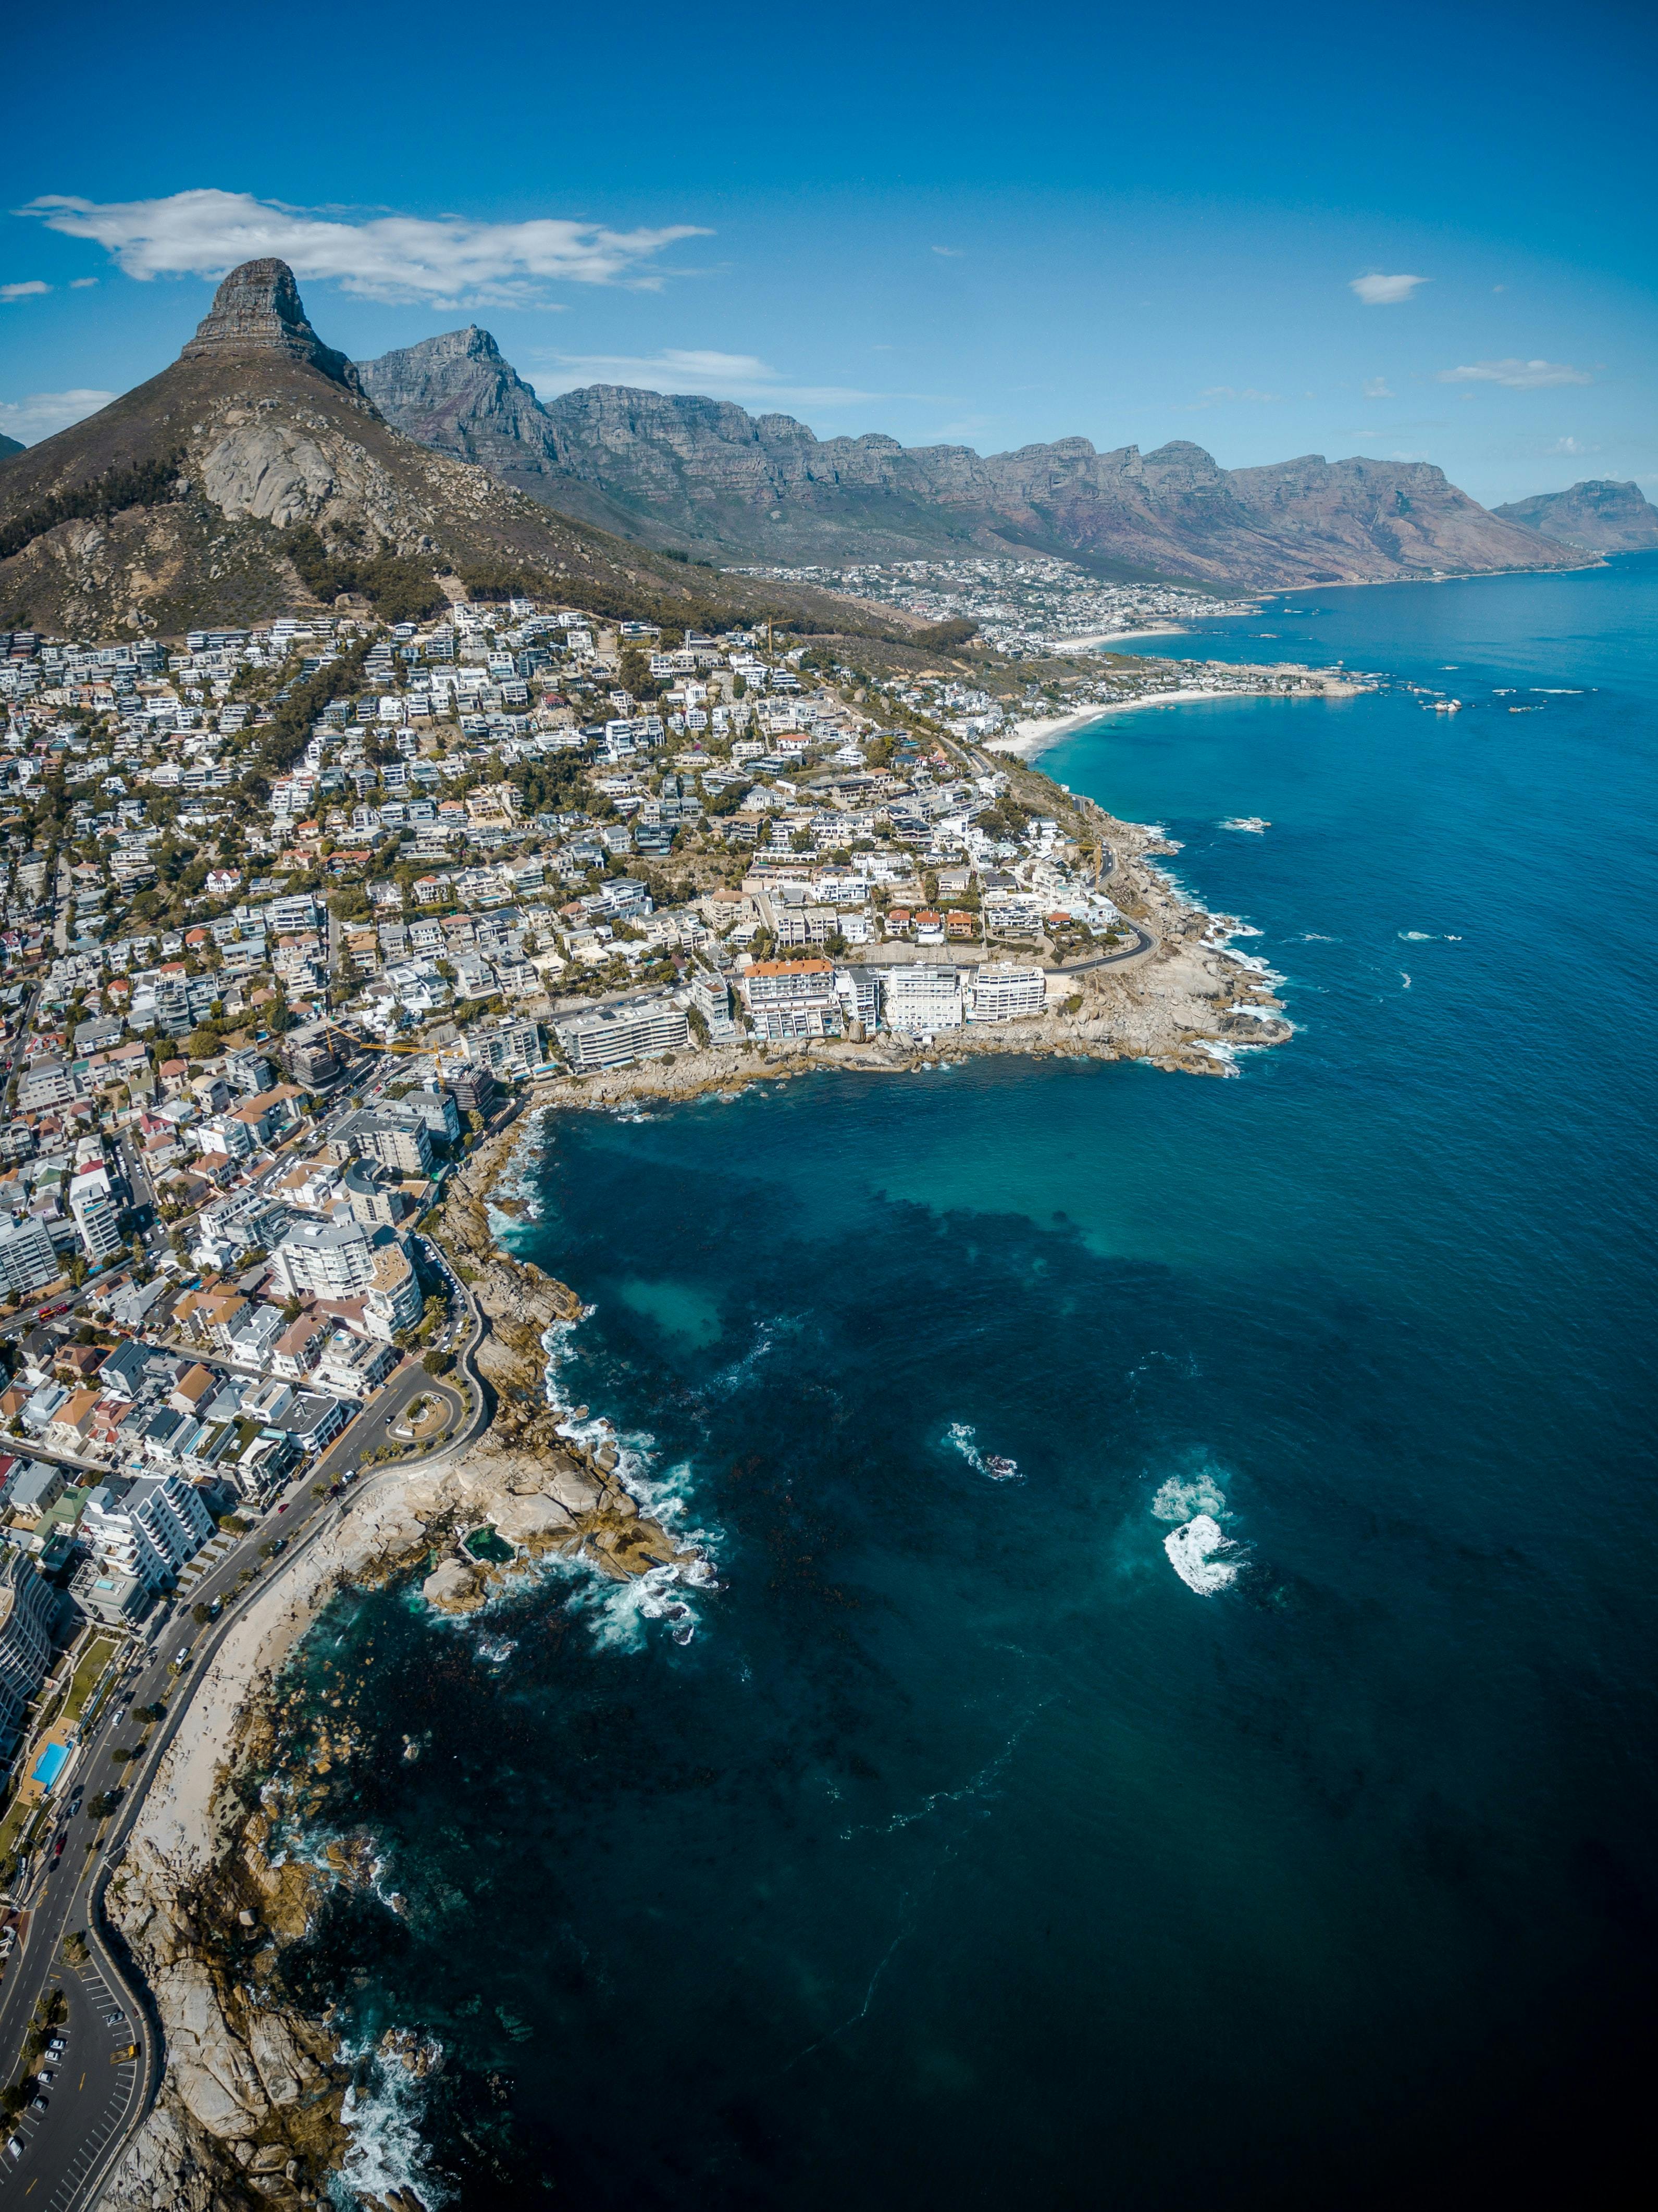 Coastline of Cape Town, South Africa